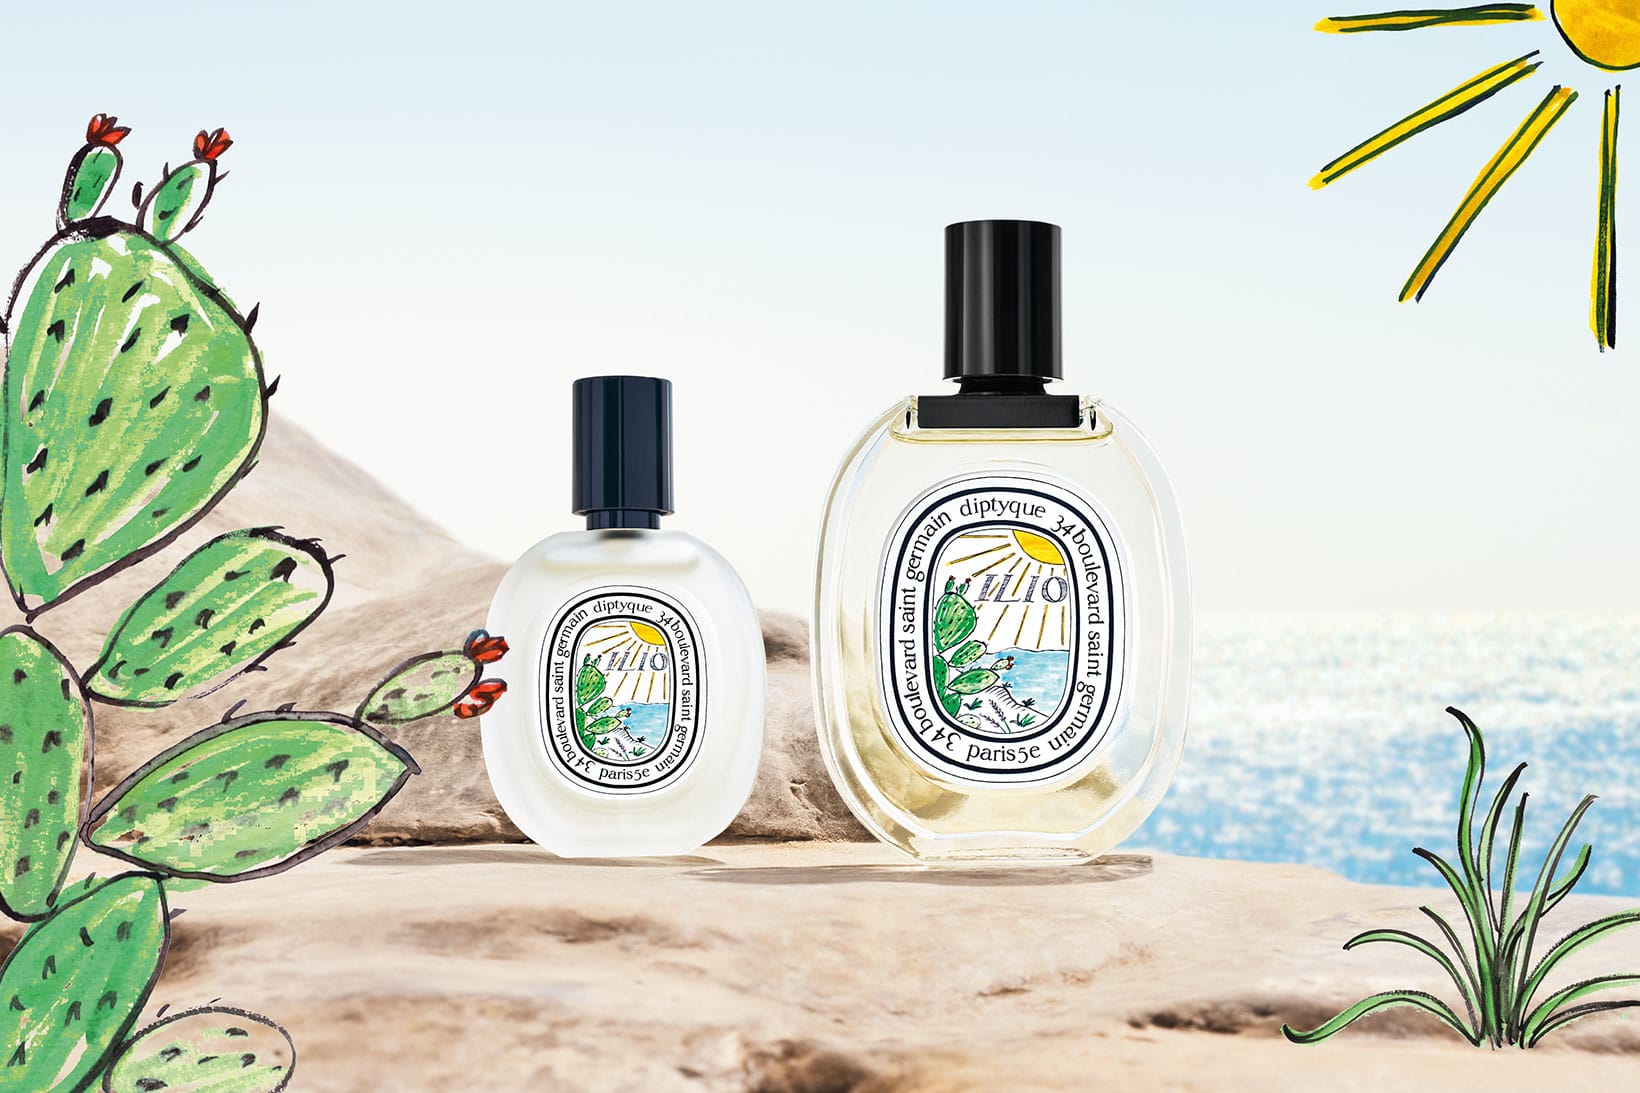 diptyque Introduces New Perfume "Ilio" for Summer | Hypebae